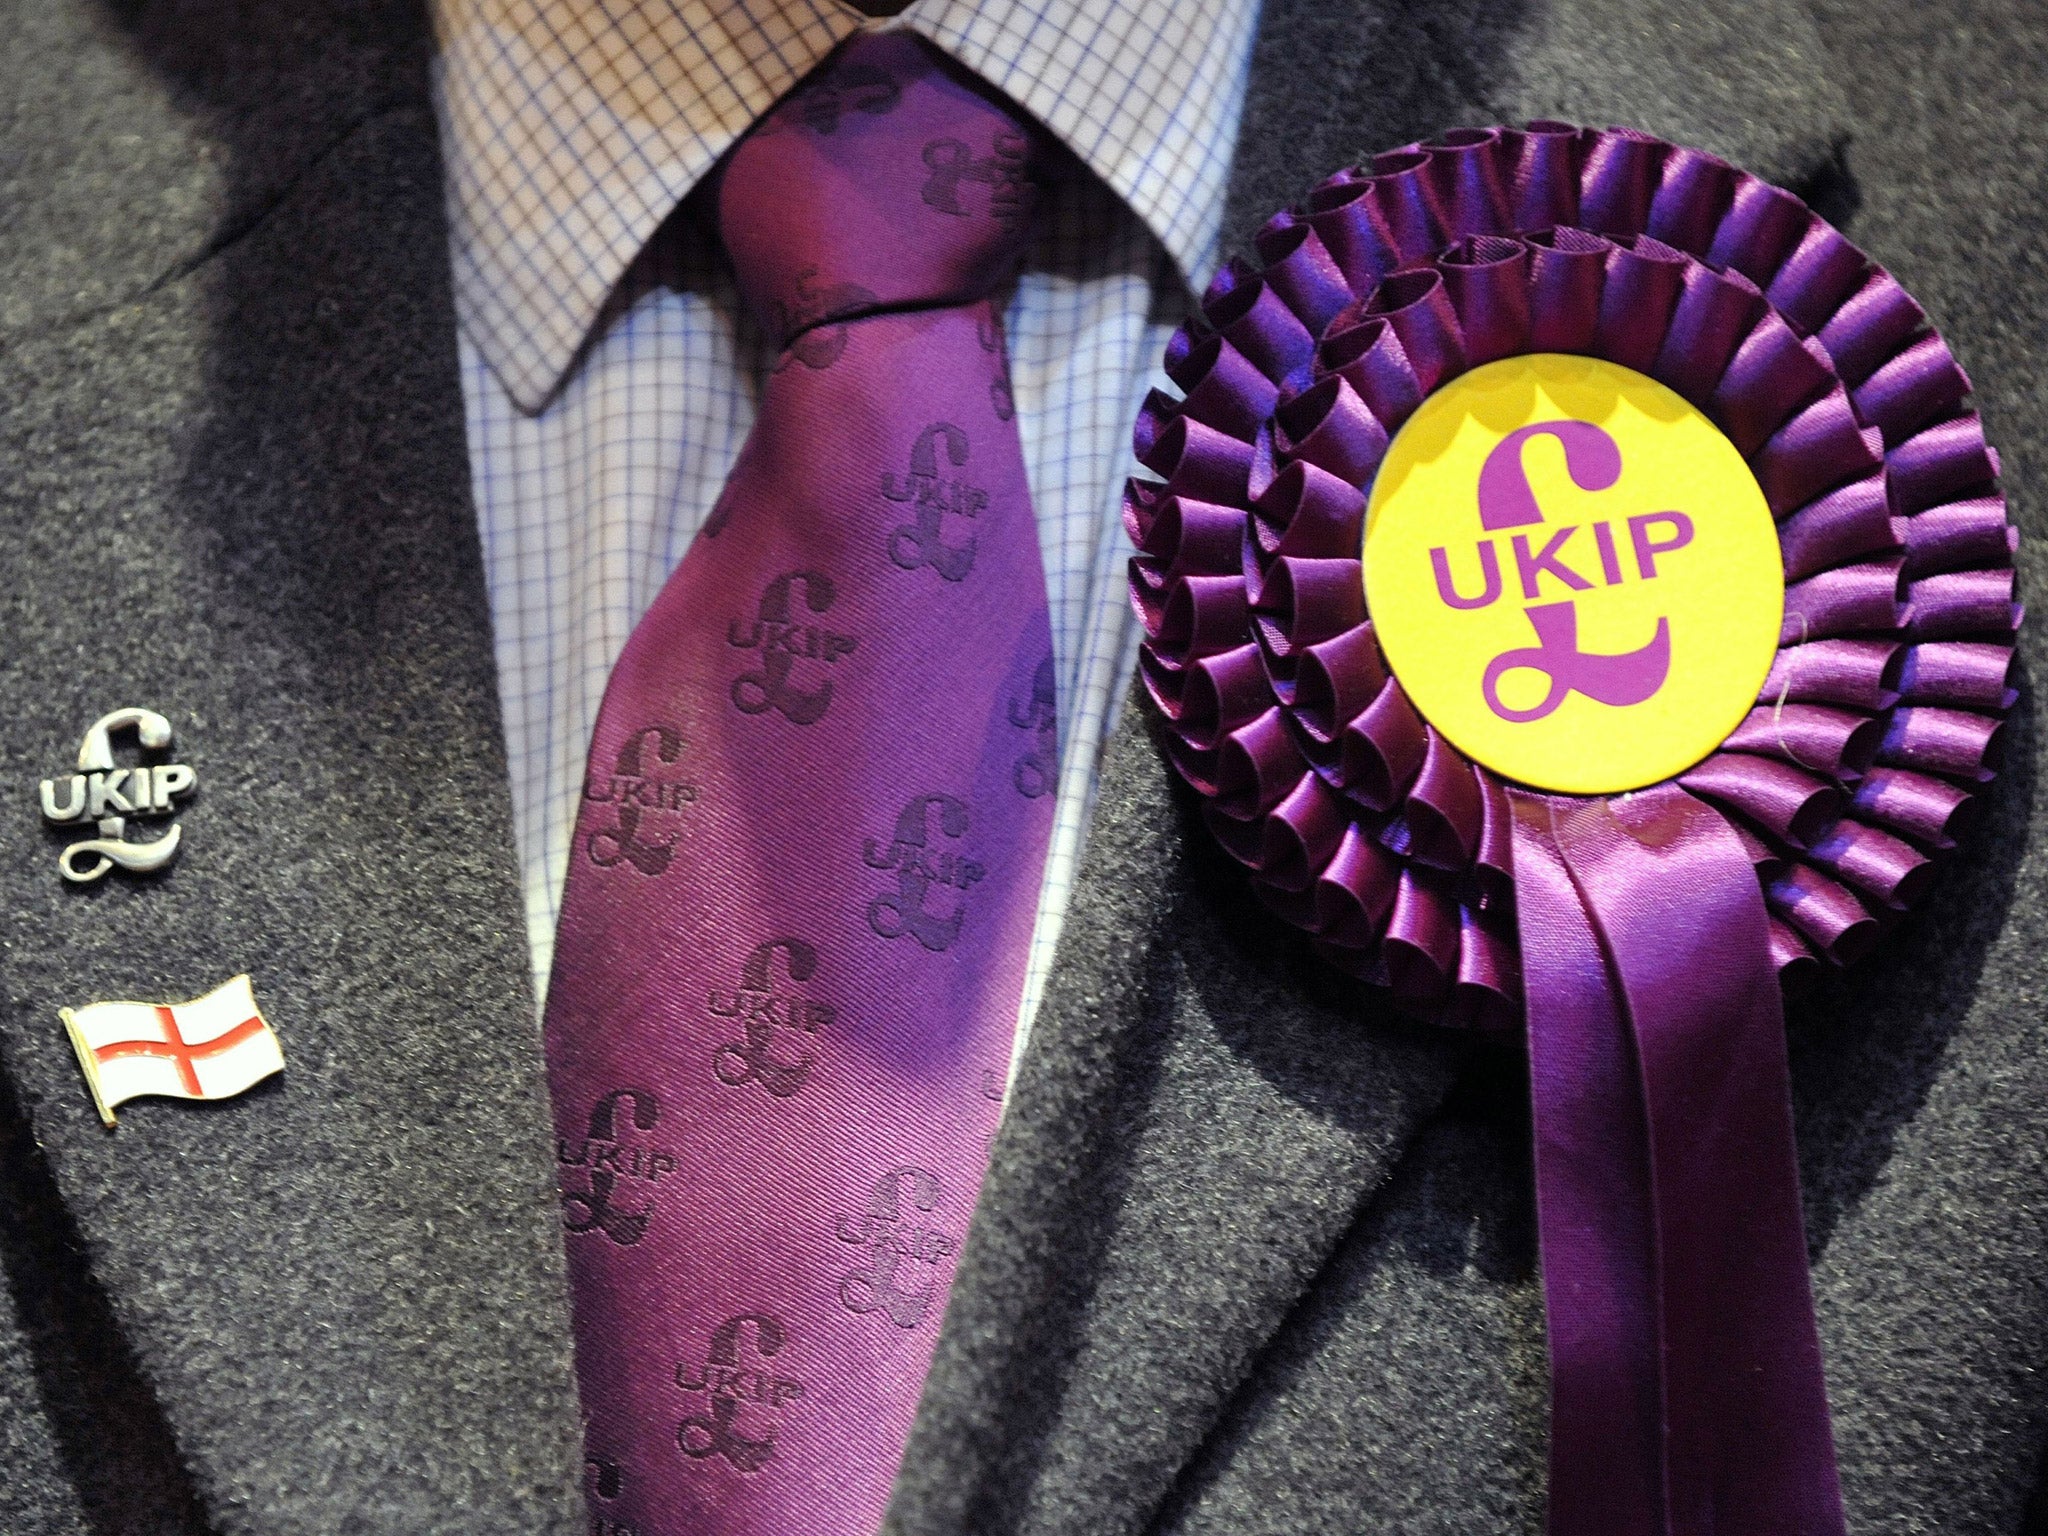 Entwistle was able to help establish the Bury branch of Ukip in 2011. File photo